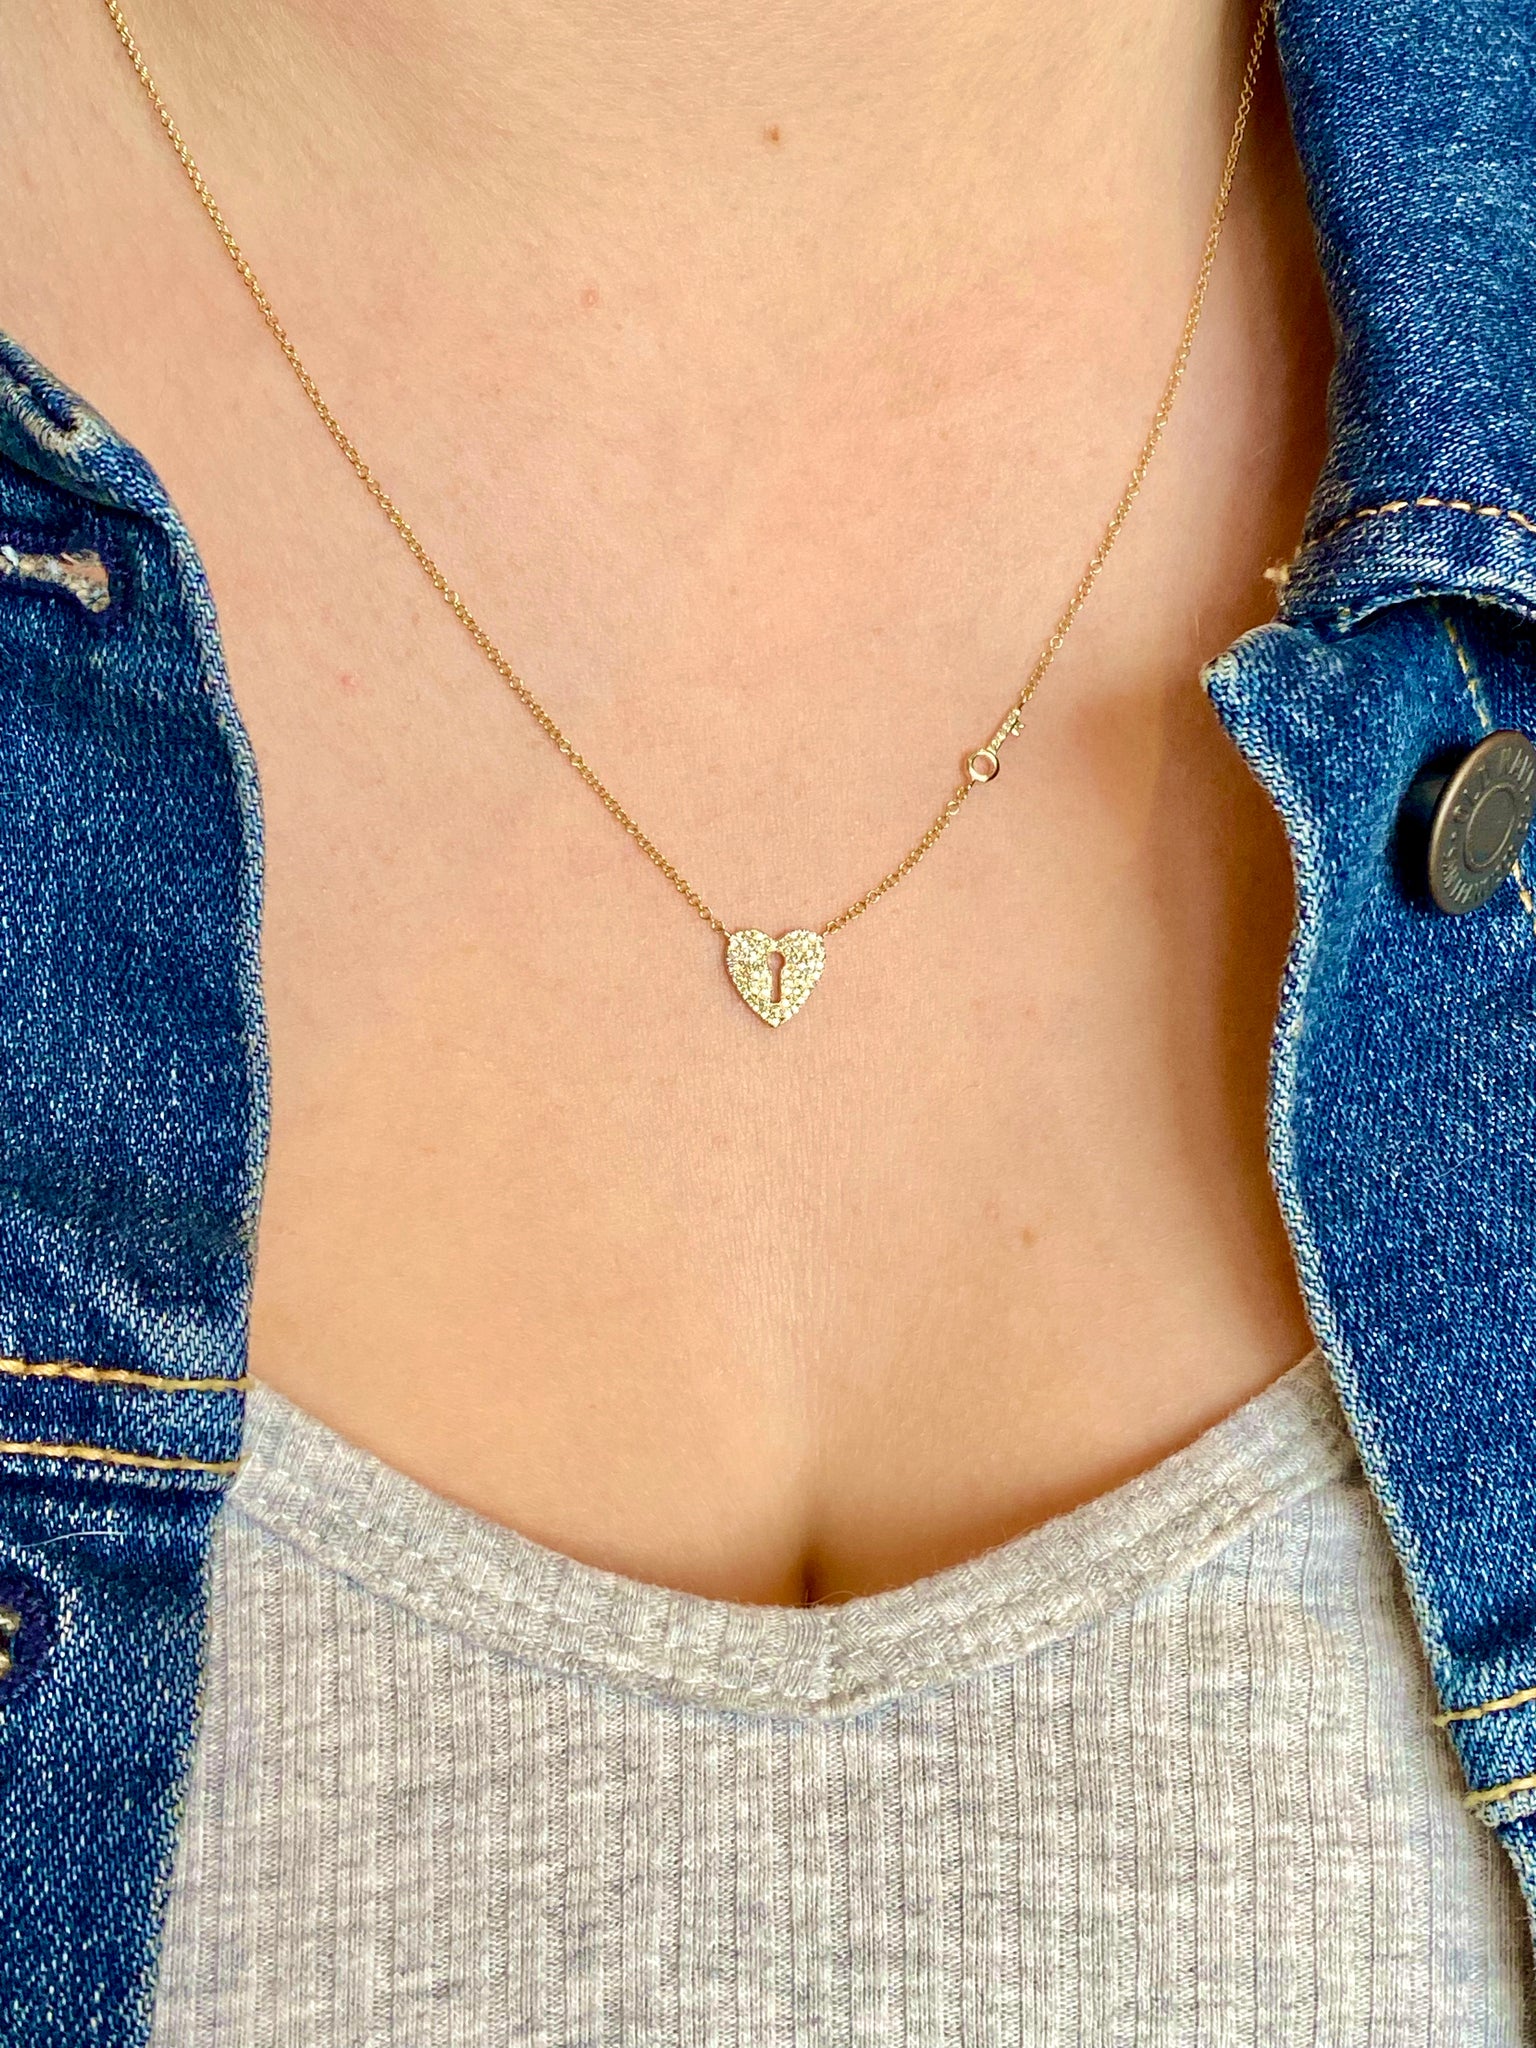 14K GOLD AND DIAMOND KEY AND HEART NECKLACE